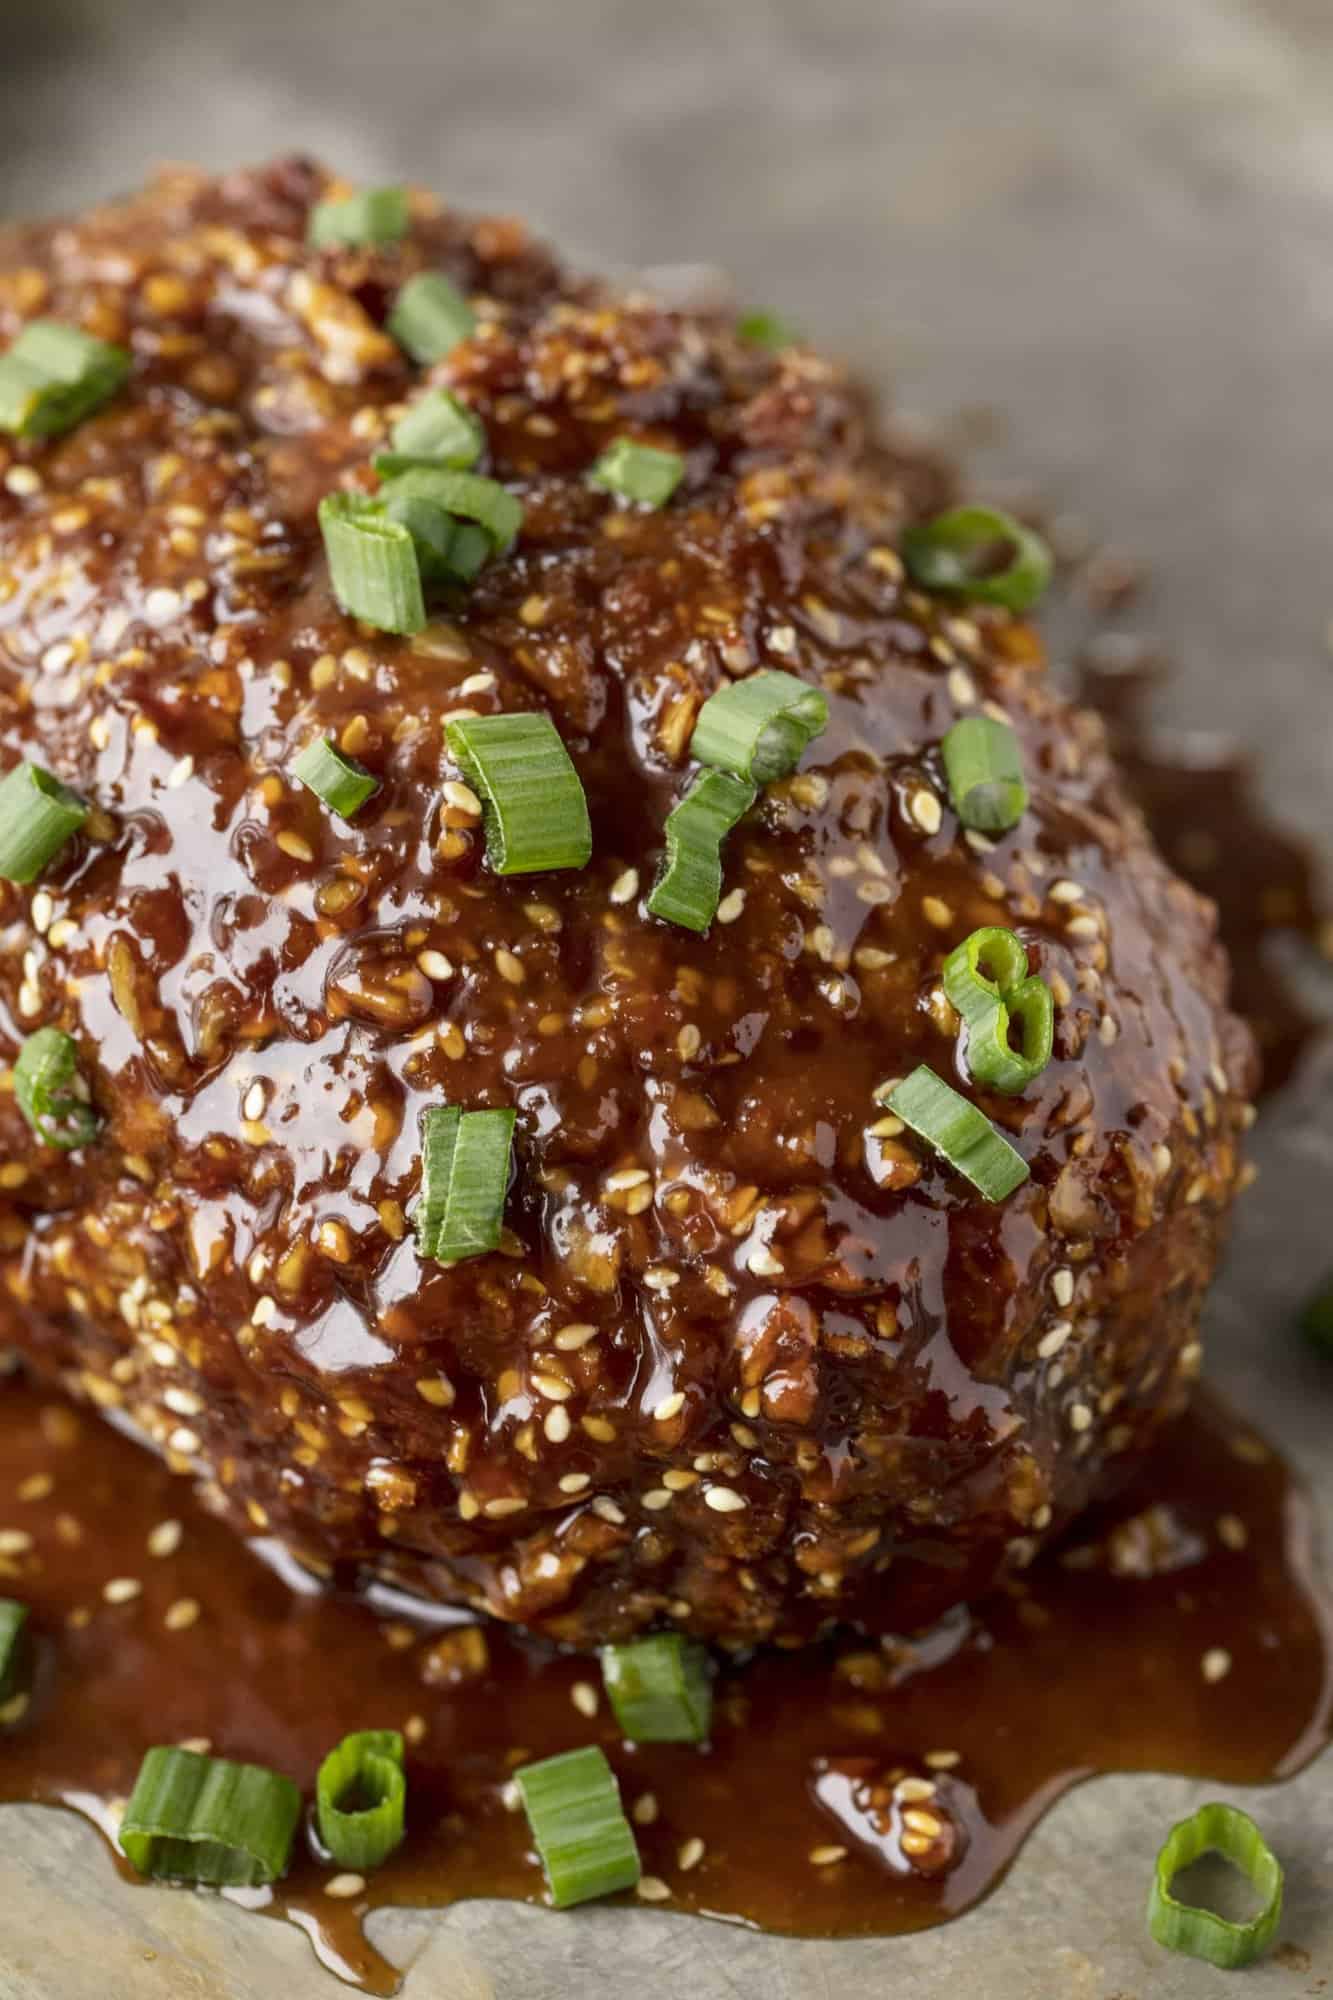 Korean Meatloaf: All the crave-able flavors of Korean barbecue in a comfort-food meatloaf with a sweet and tangy Korean glaze. This ain't your momma's meatloaf!